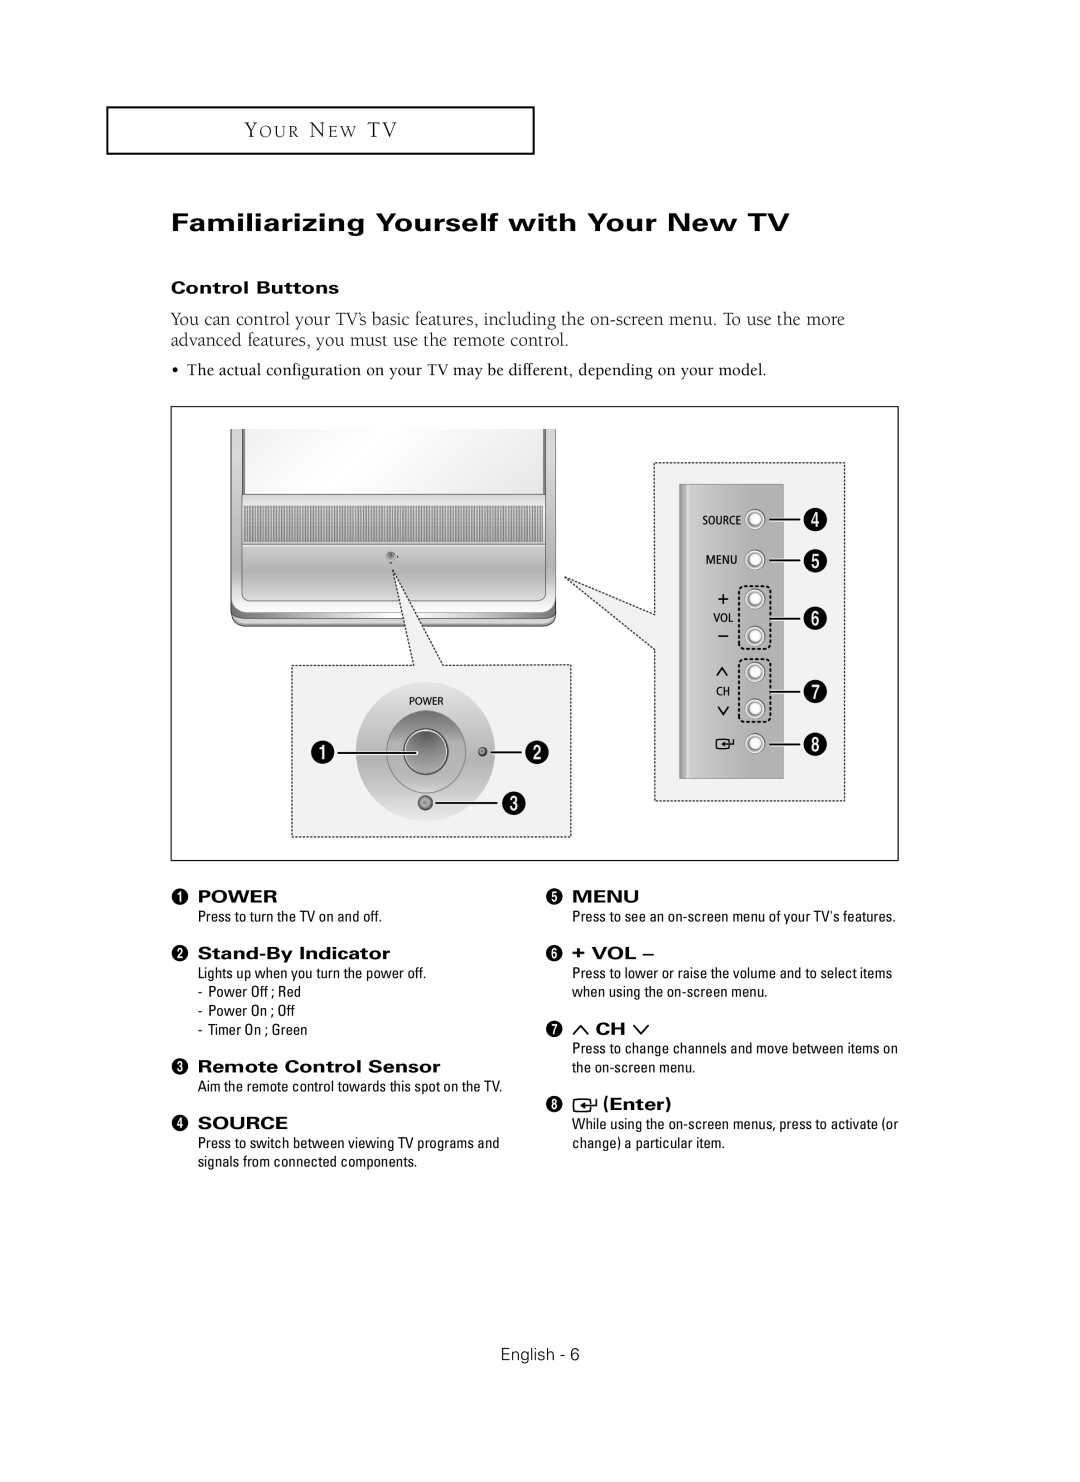 Samsung HC-P4241W Familiarizing Yourself with Your New TV, Control Buttons, Œ Power, ˆ Menu, ´ Stand-By Indicator, Ø + Vol 